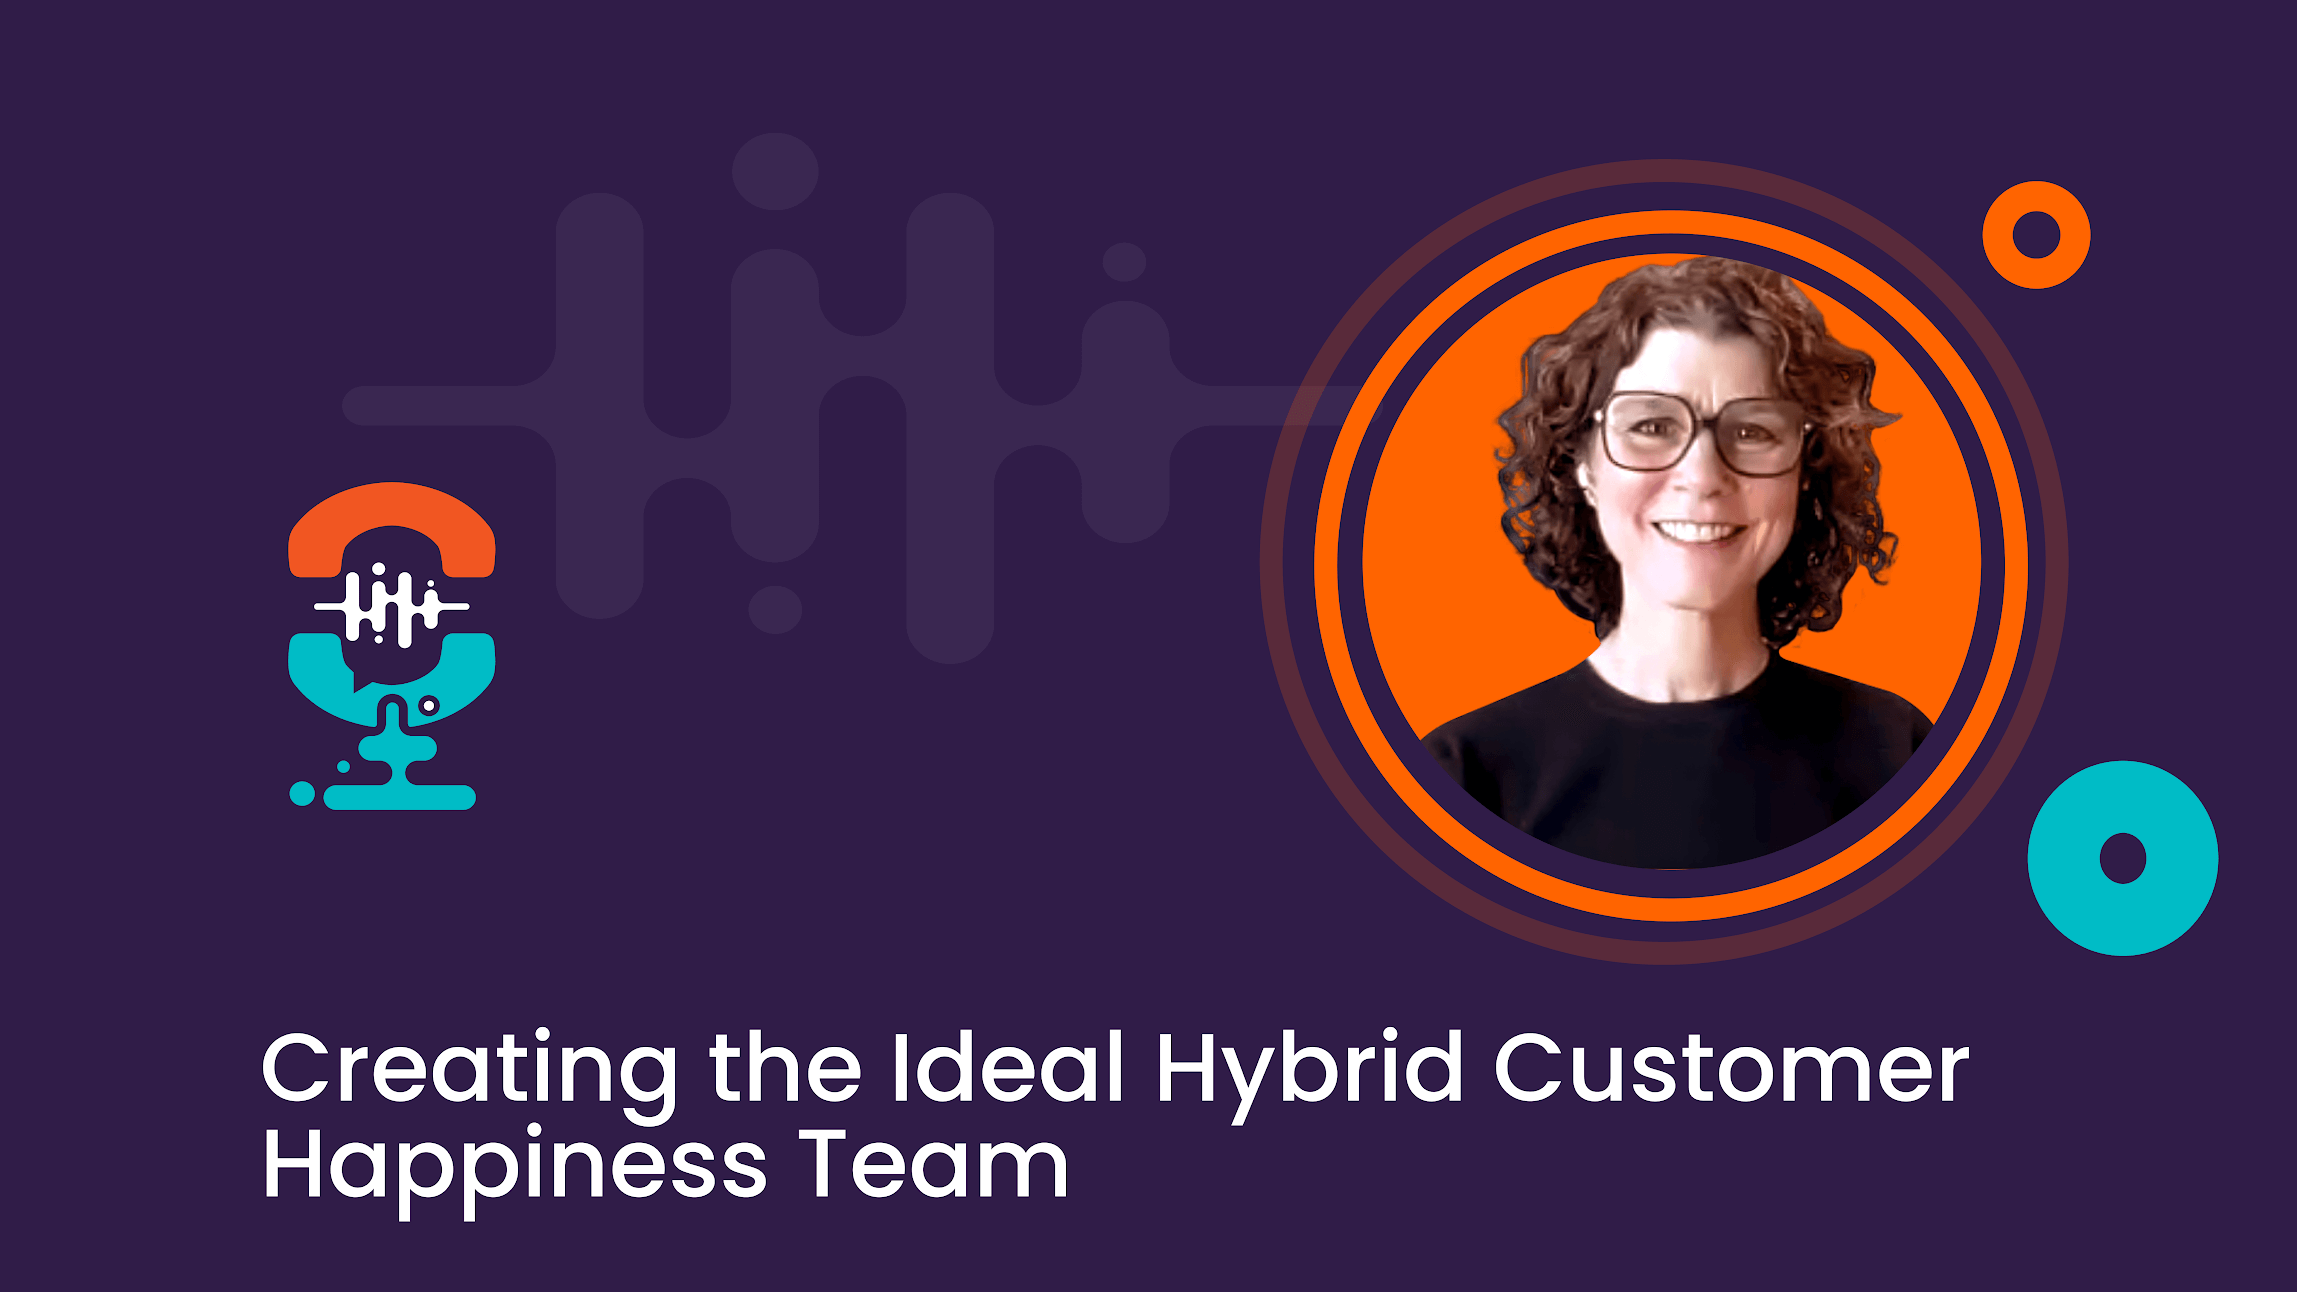 Creating the Ideal Hybrid Customer Happiness Team